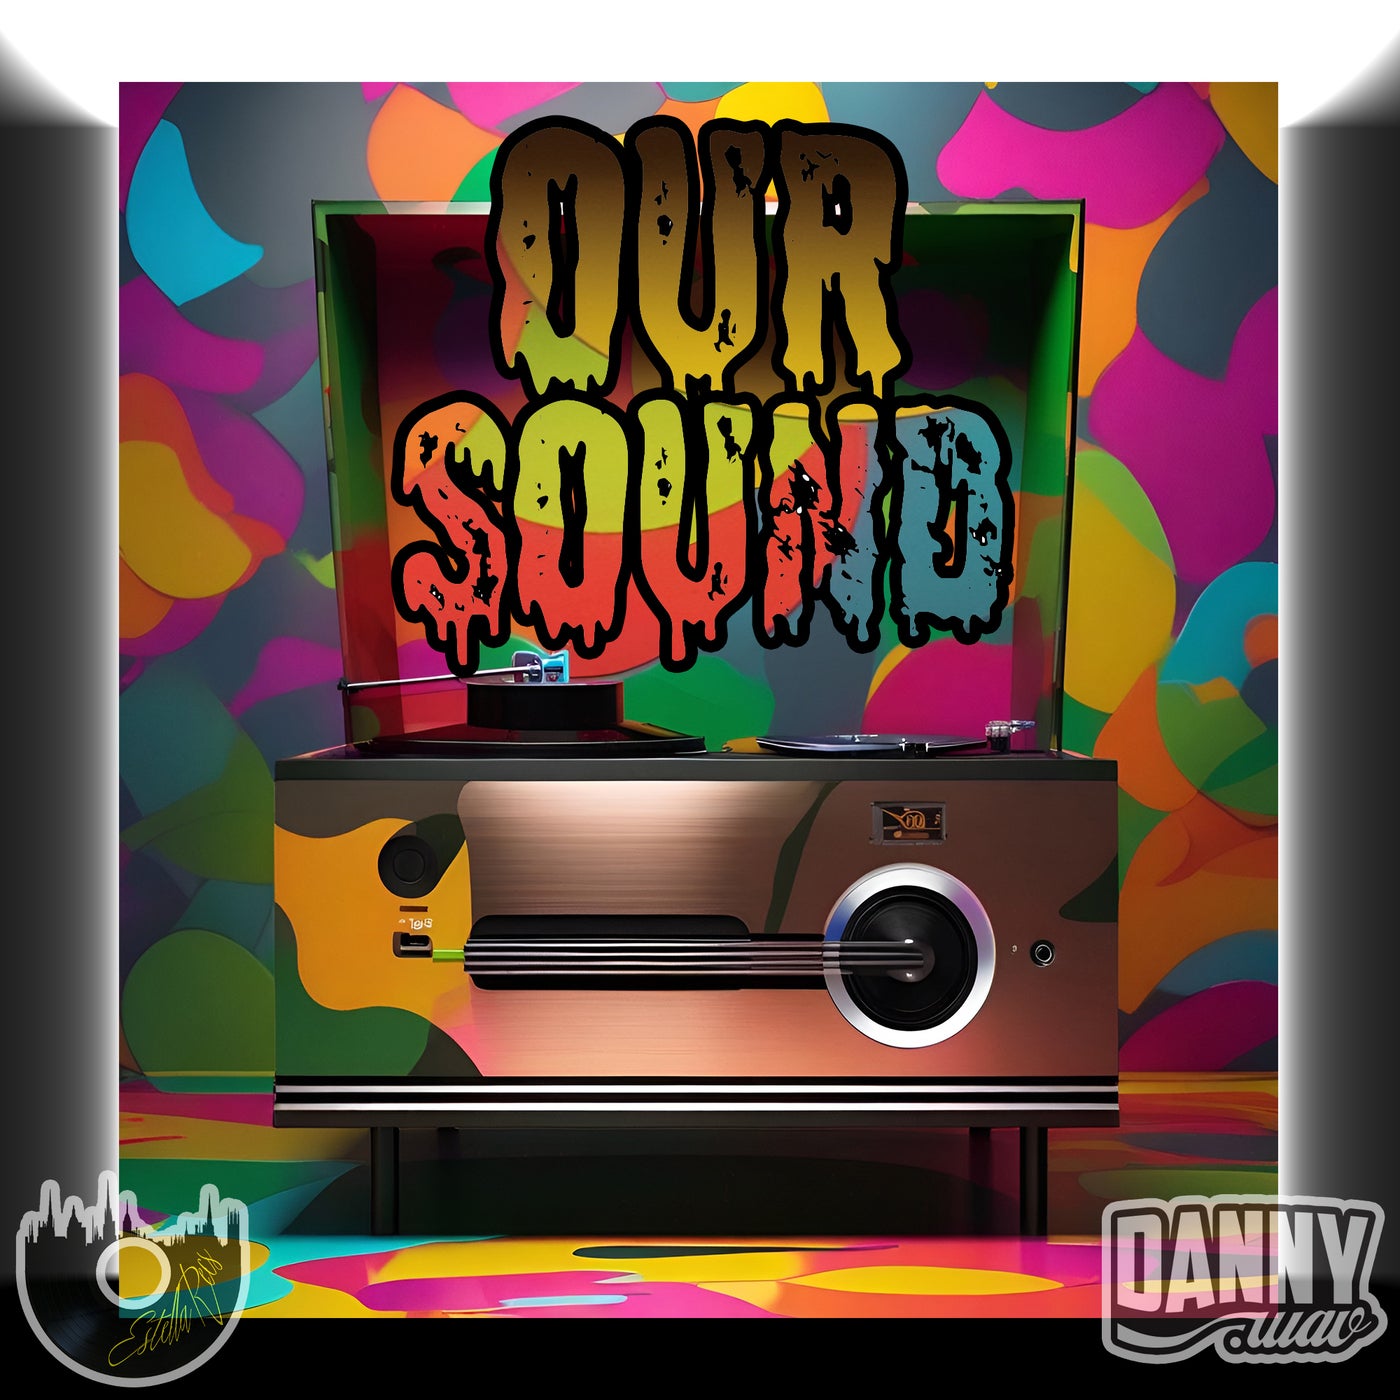 Our Sound